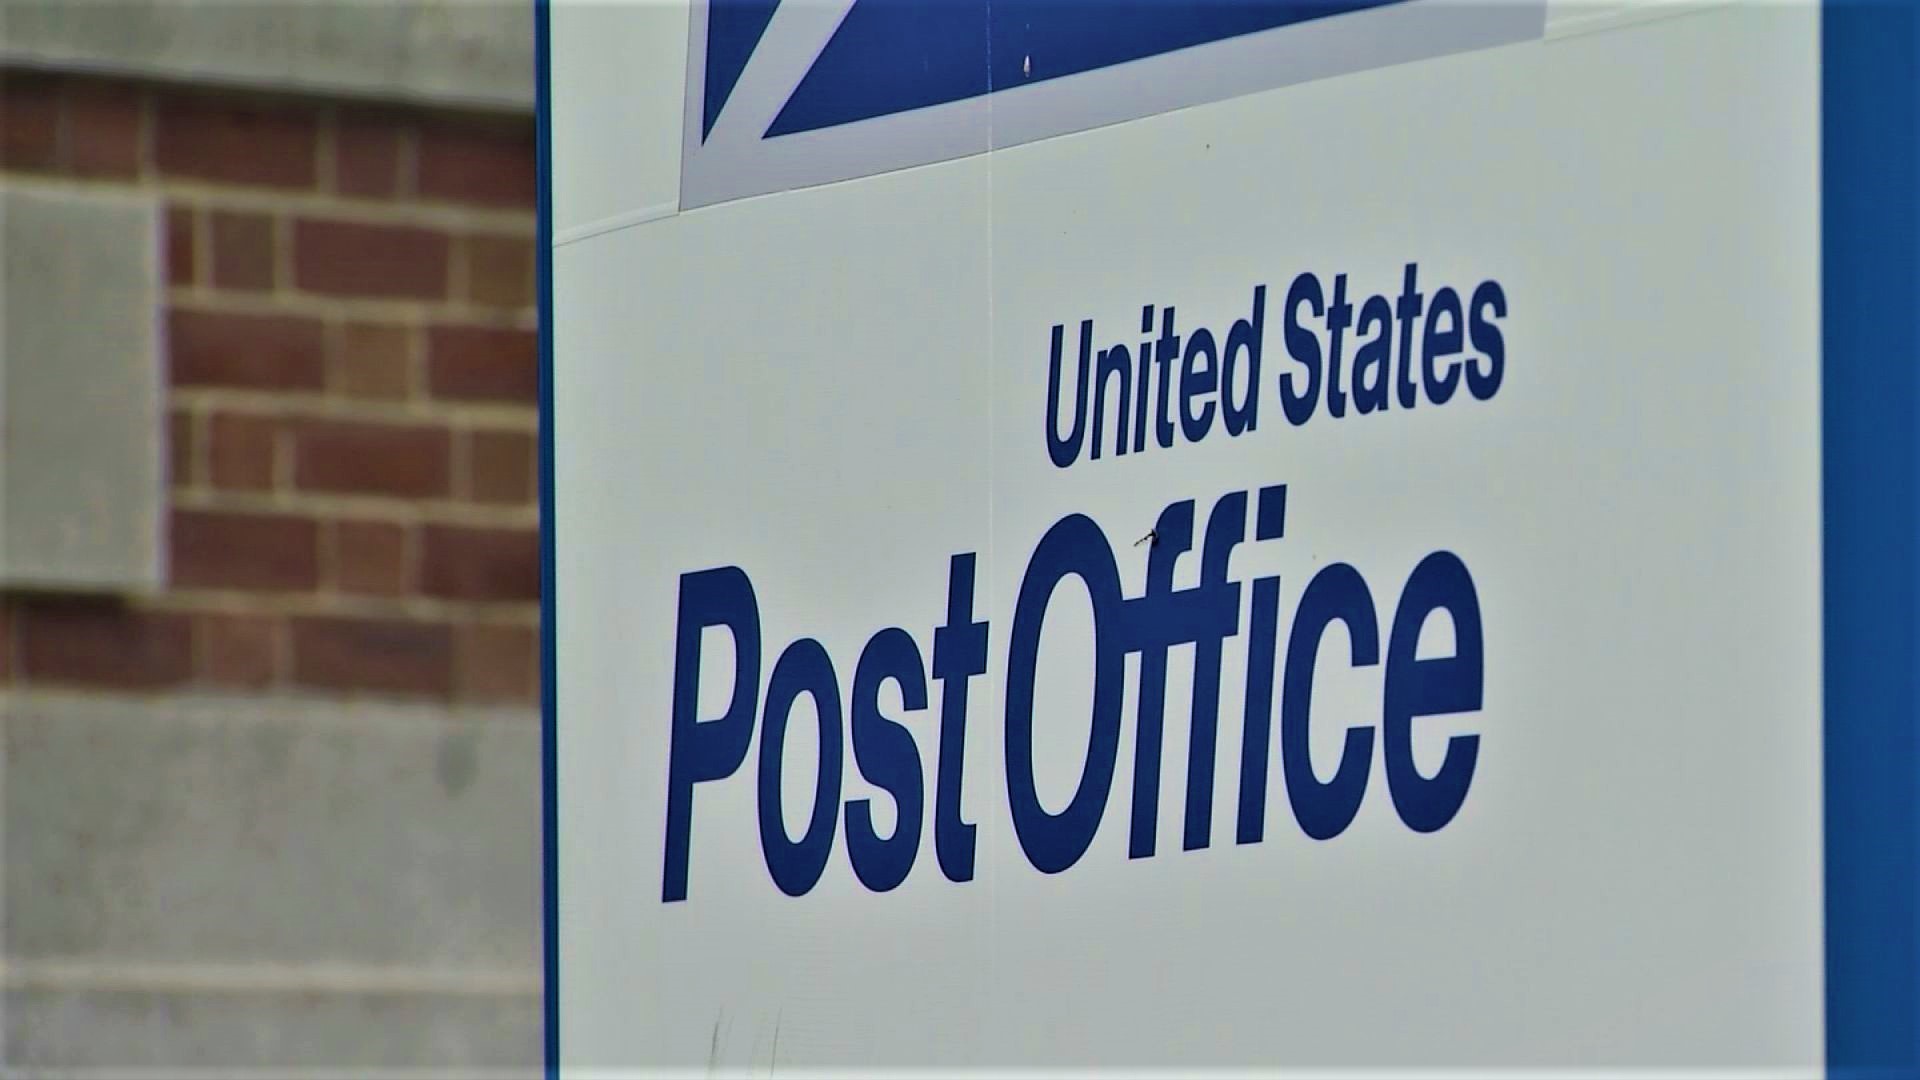 Maine's Congressional Delegation is calling on Postmaster Louis DeJoy to address what they're calling major deficiencies.